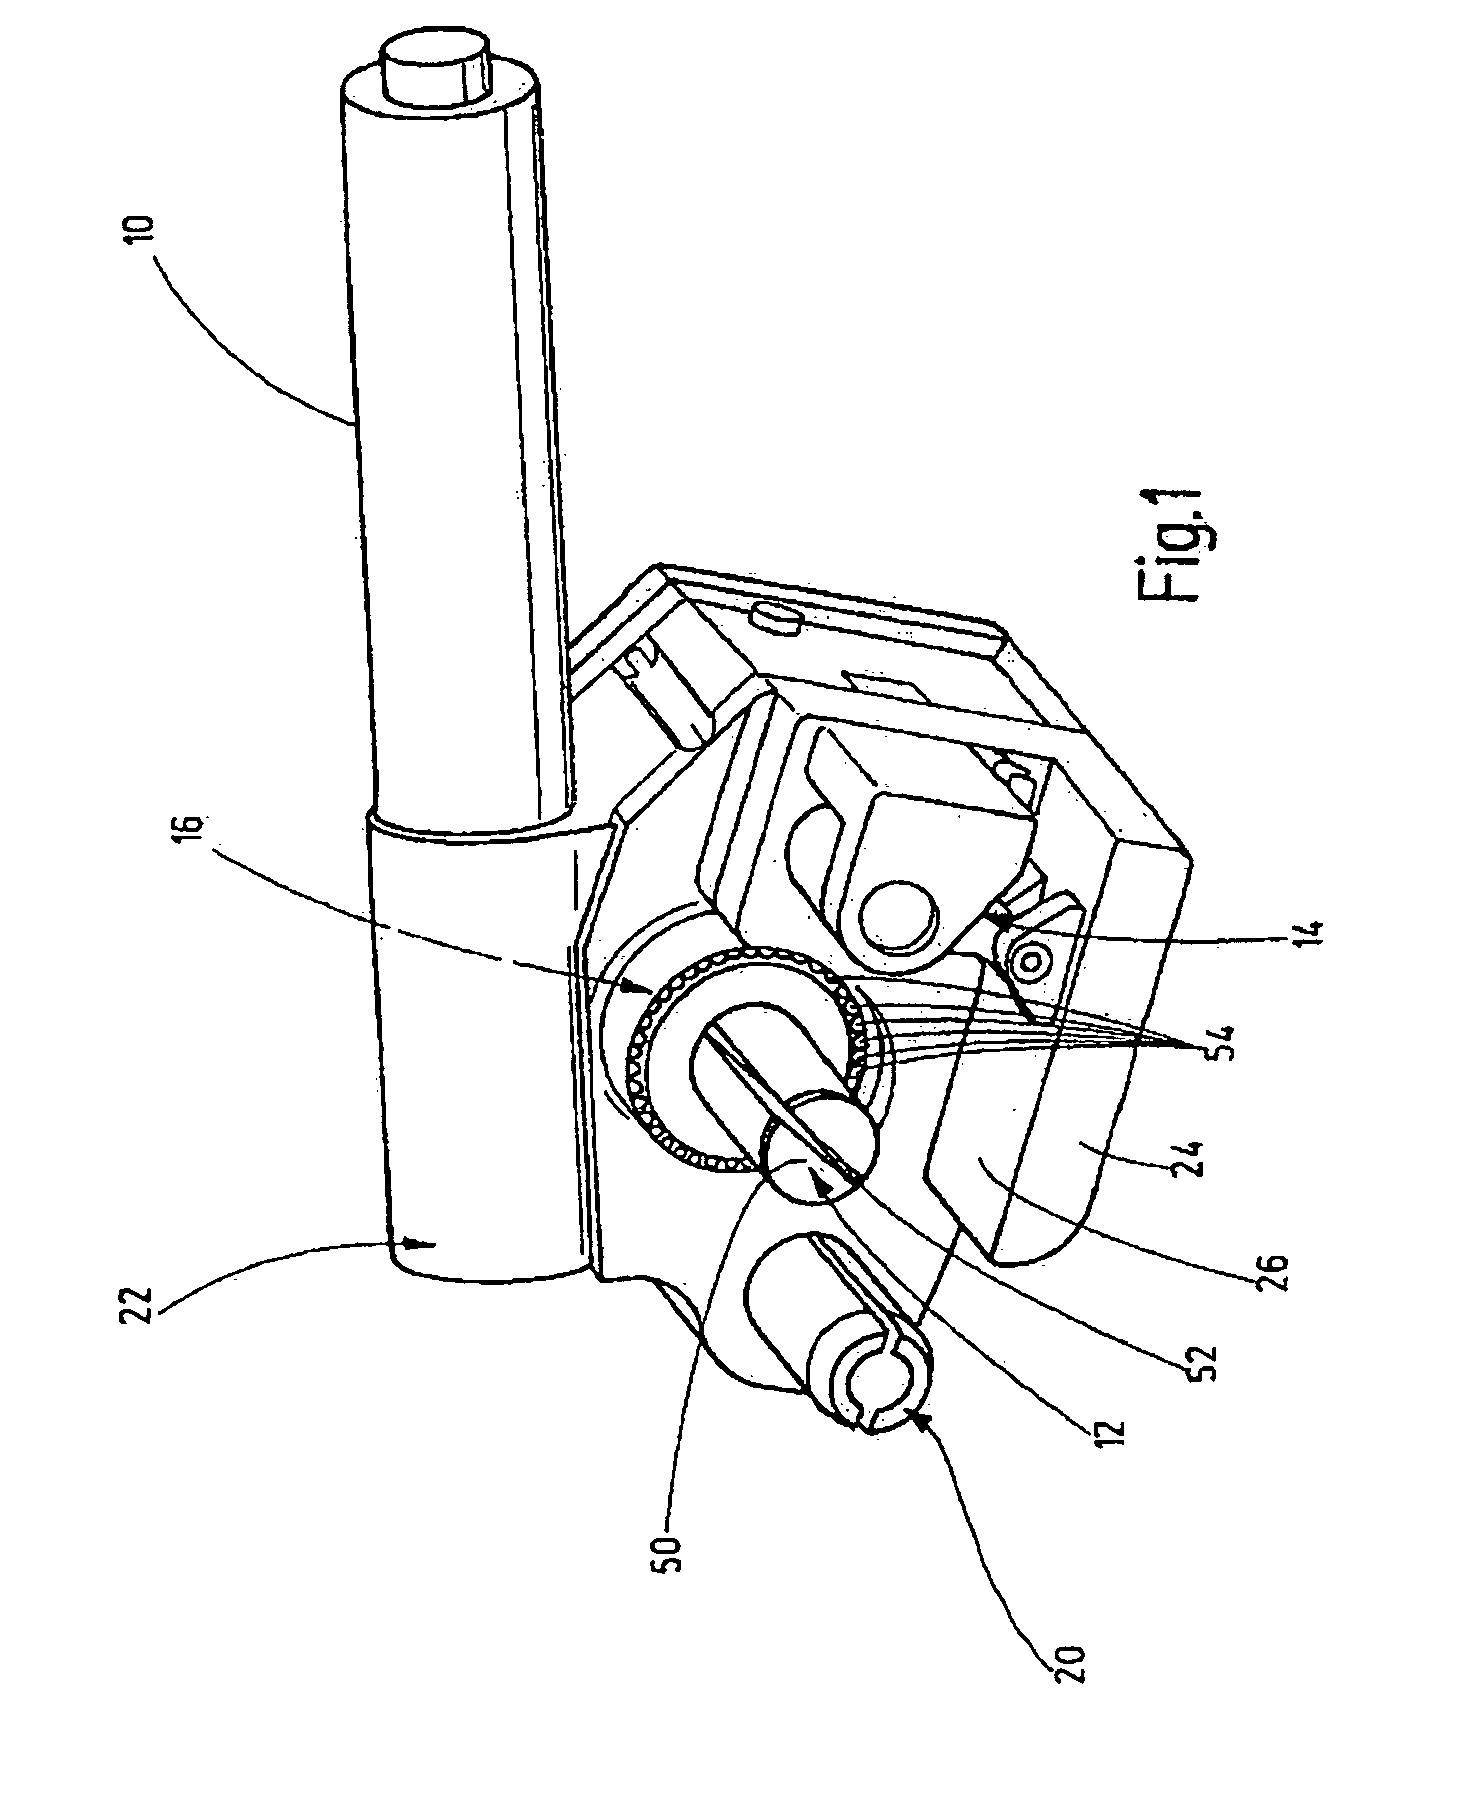 Apparatus for tensioning a band